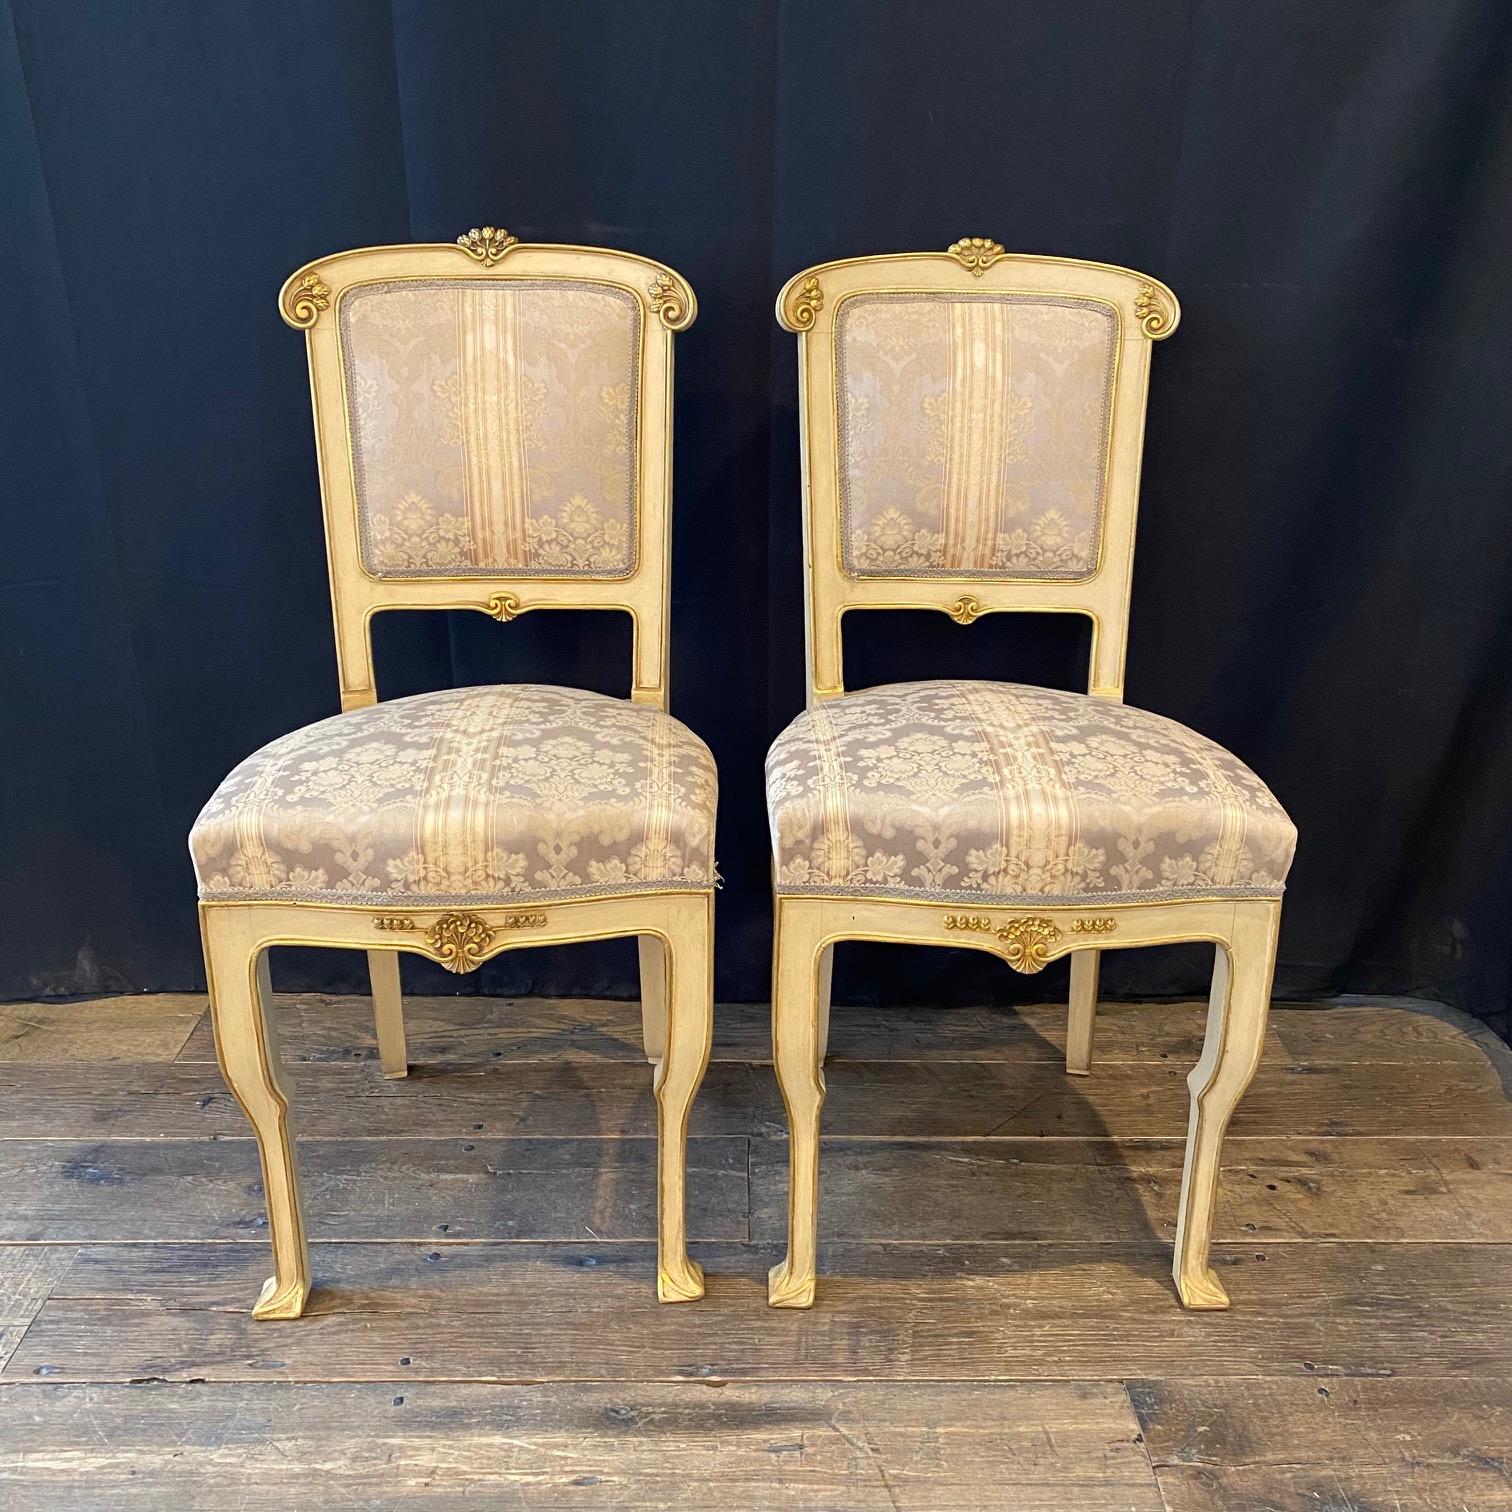 Upholstery Set of 4 Italian Art Nouveau Gold Gilt and Cream Painted Dining Chairs For Sale